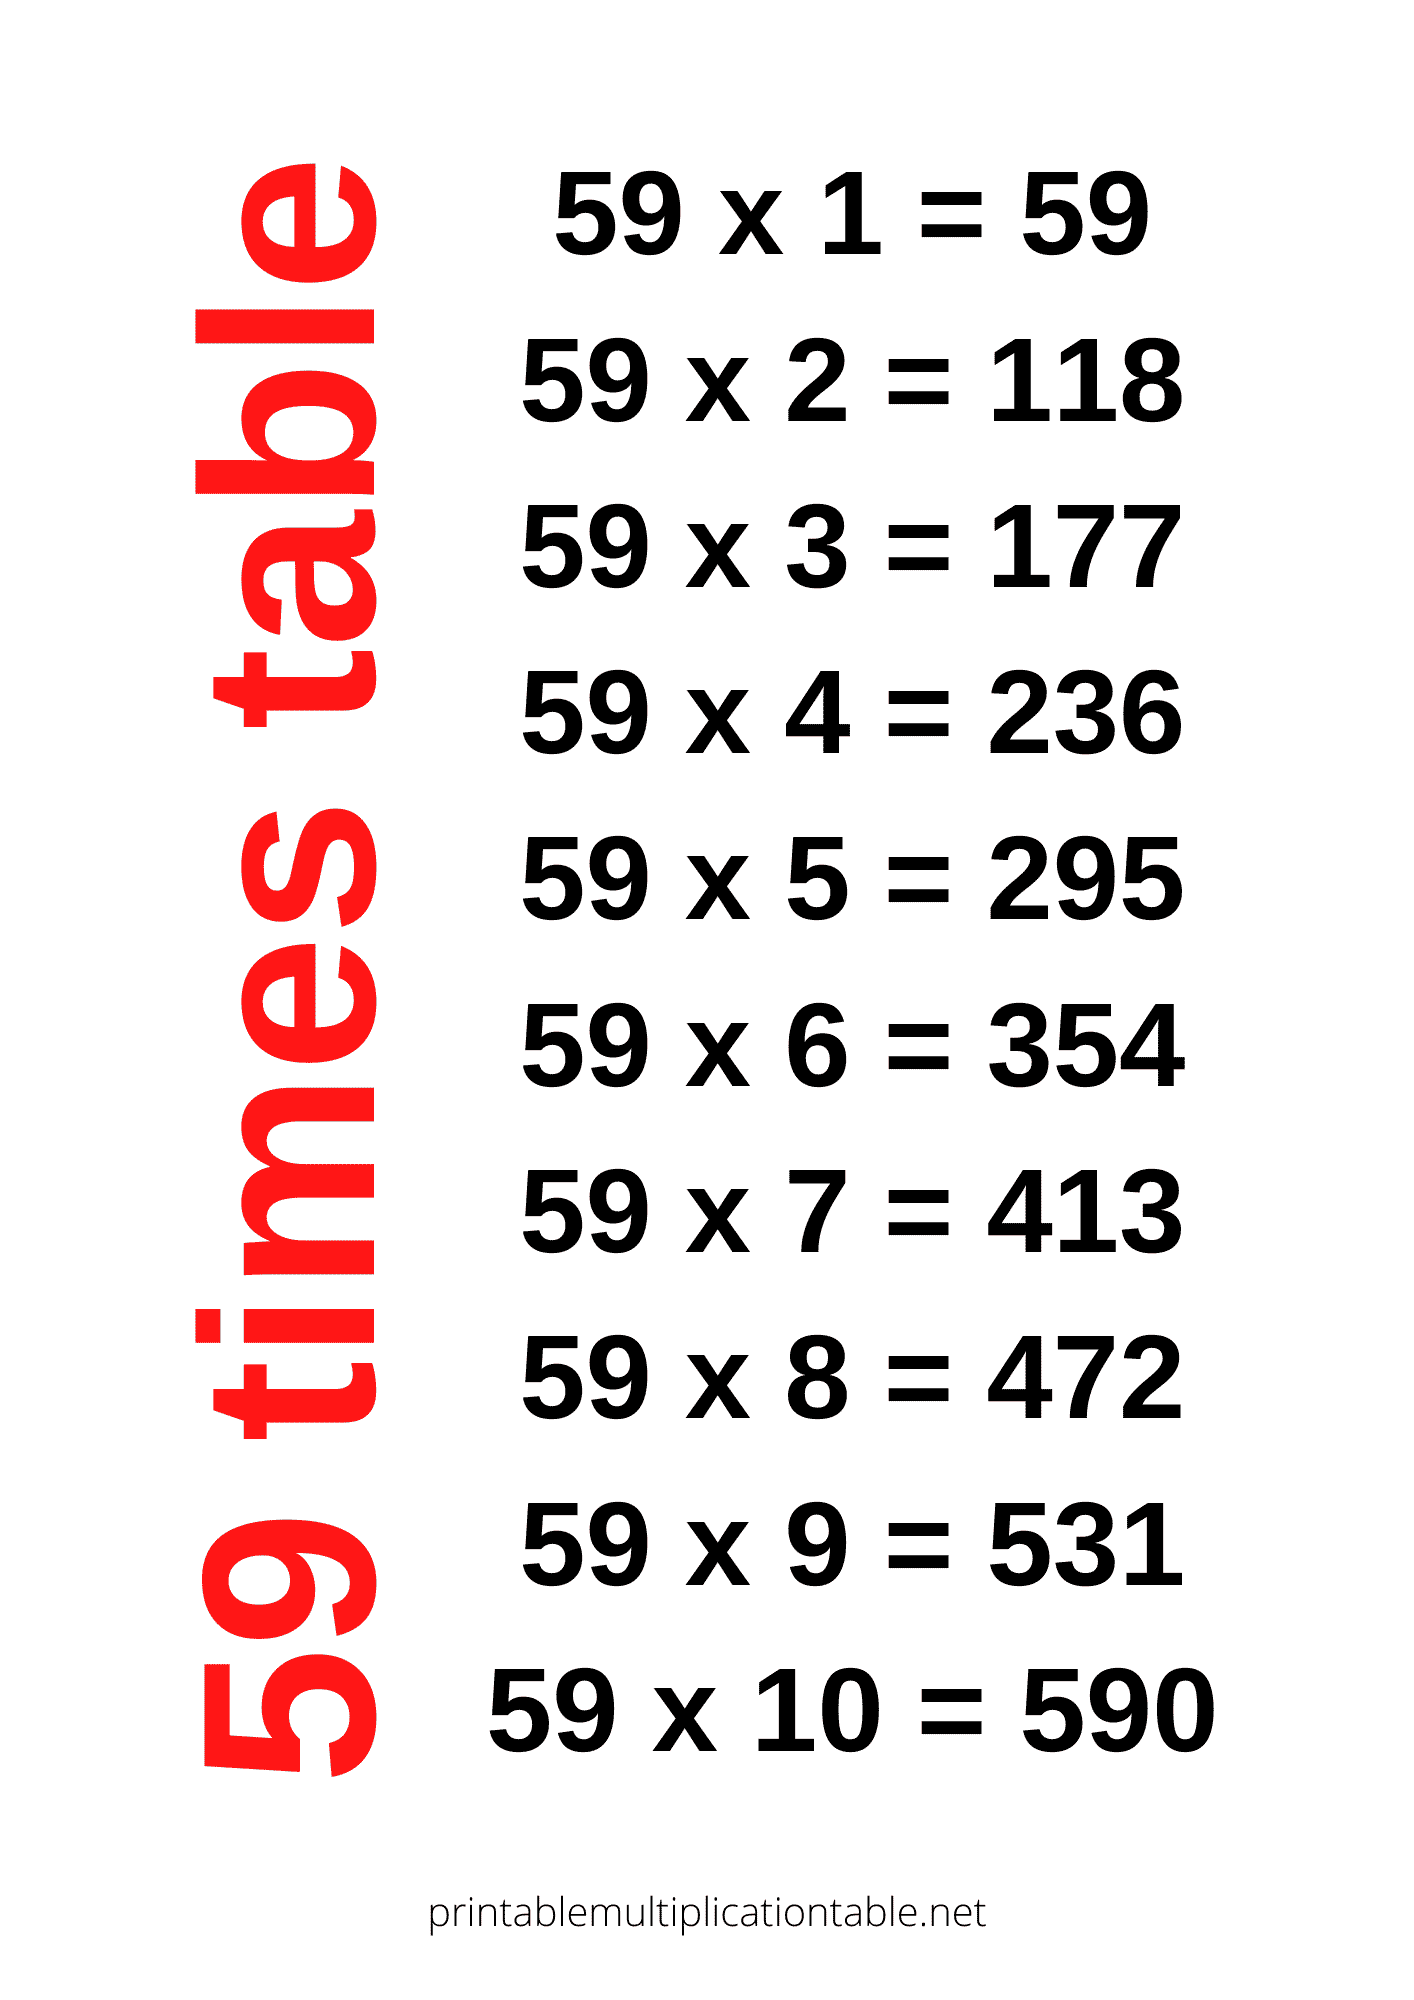 59 times table chart